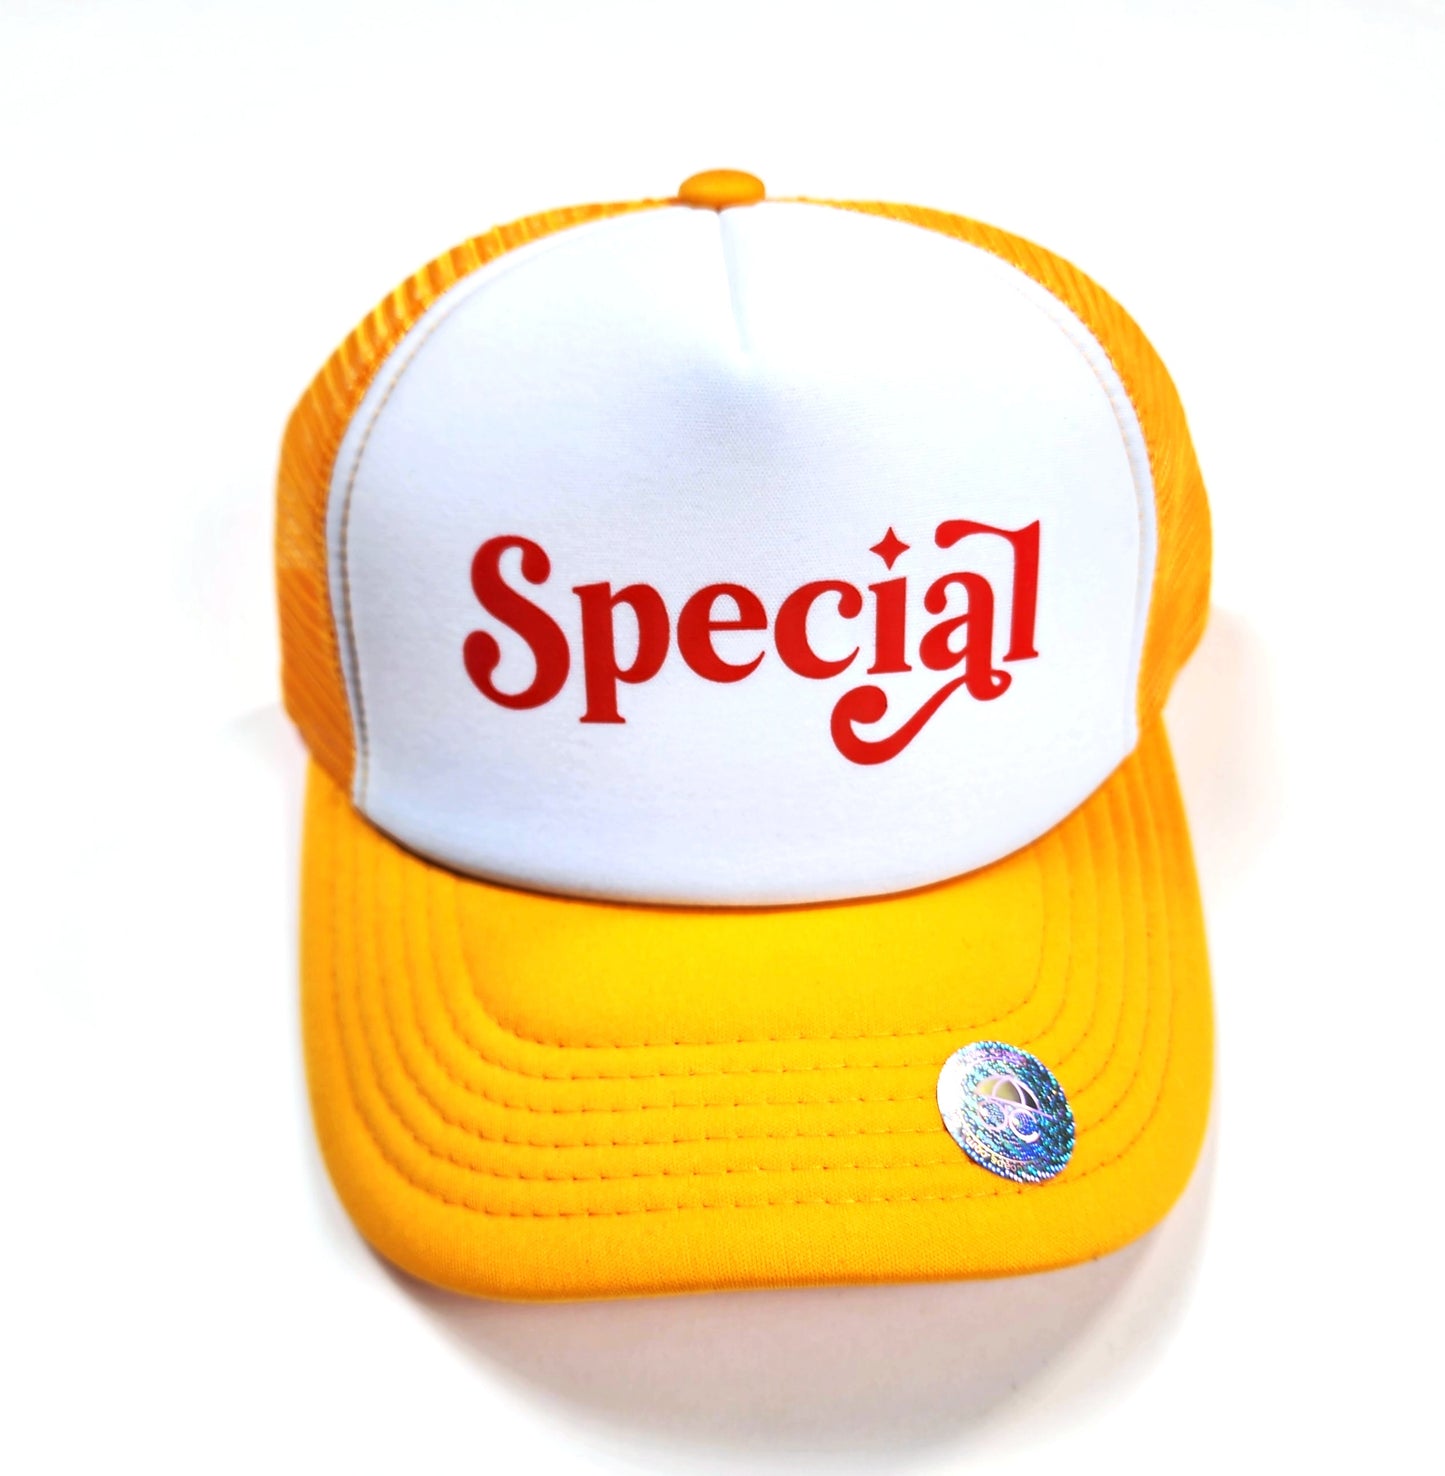 Special "Hat"